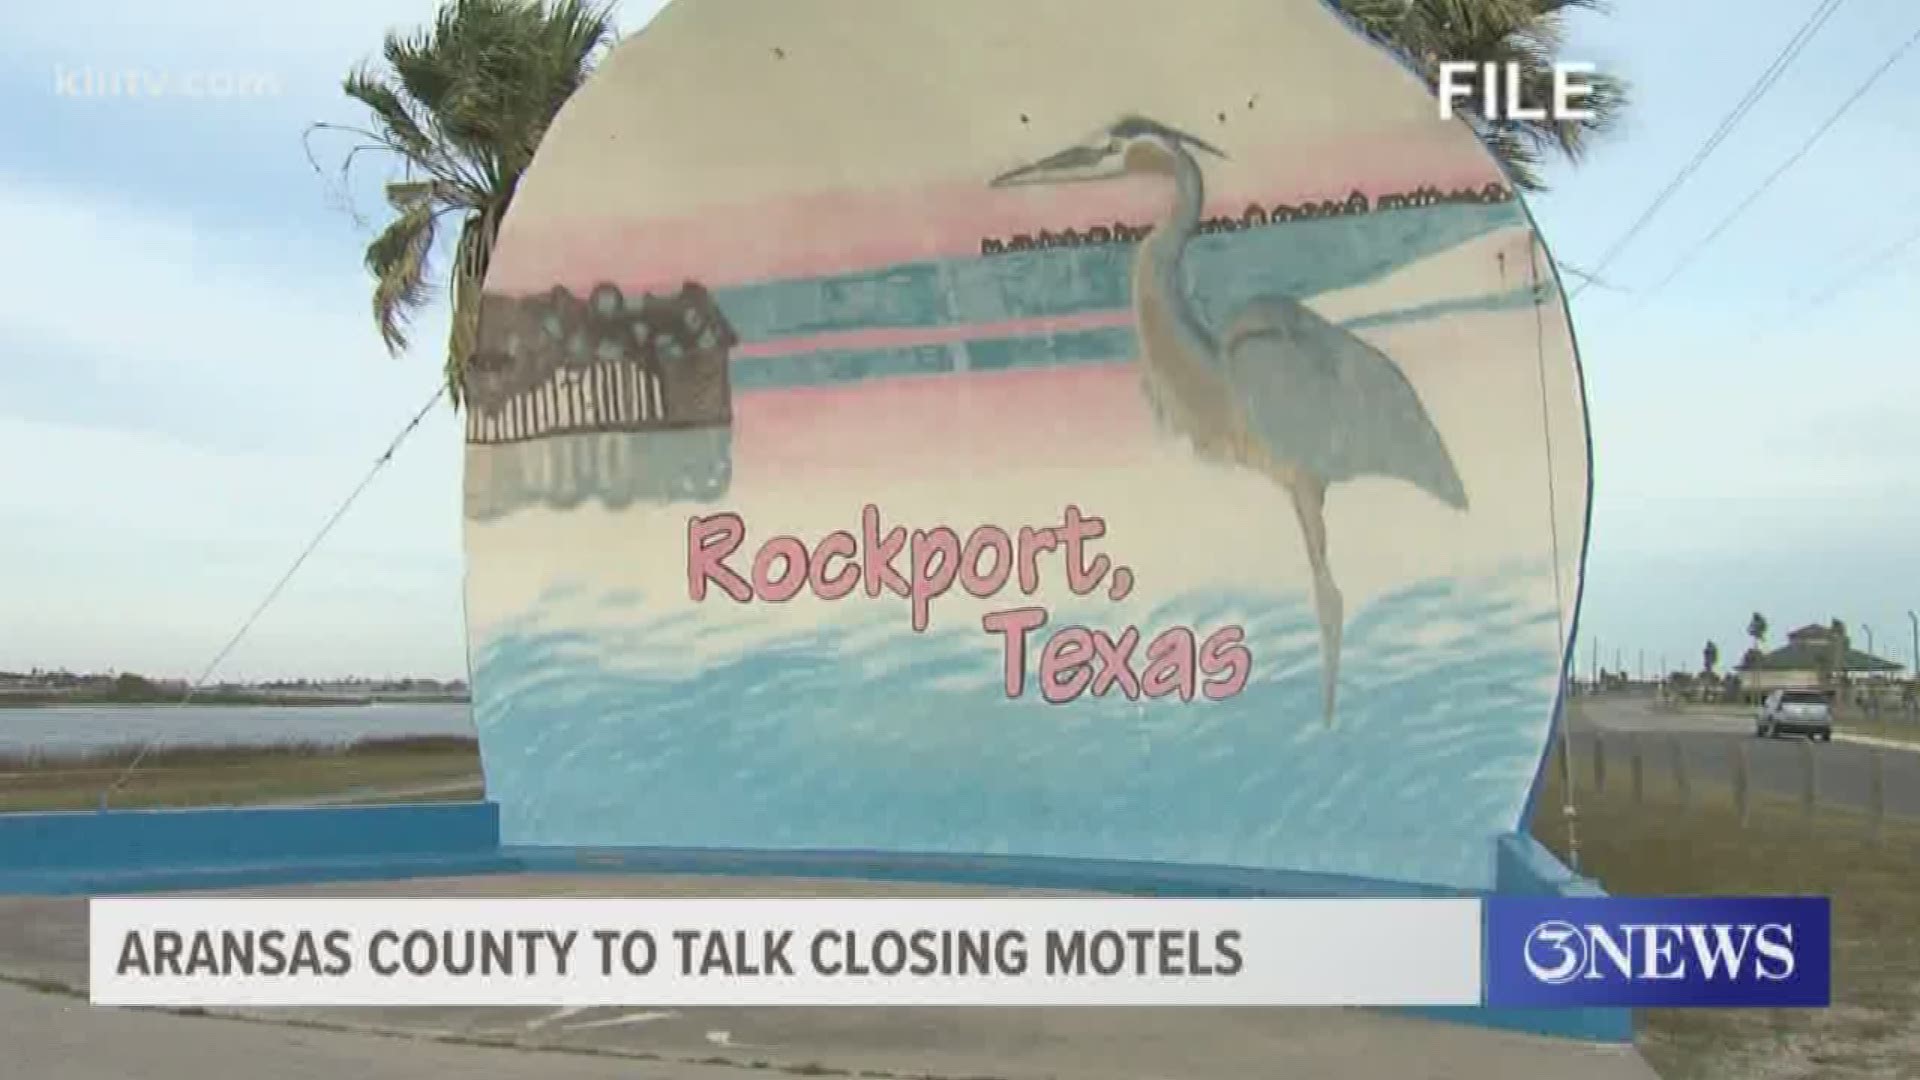 Aransas County hotels set to discuss closing options to prevent the spread of COVID-19.